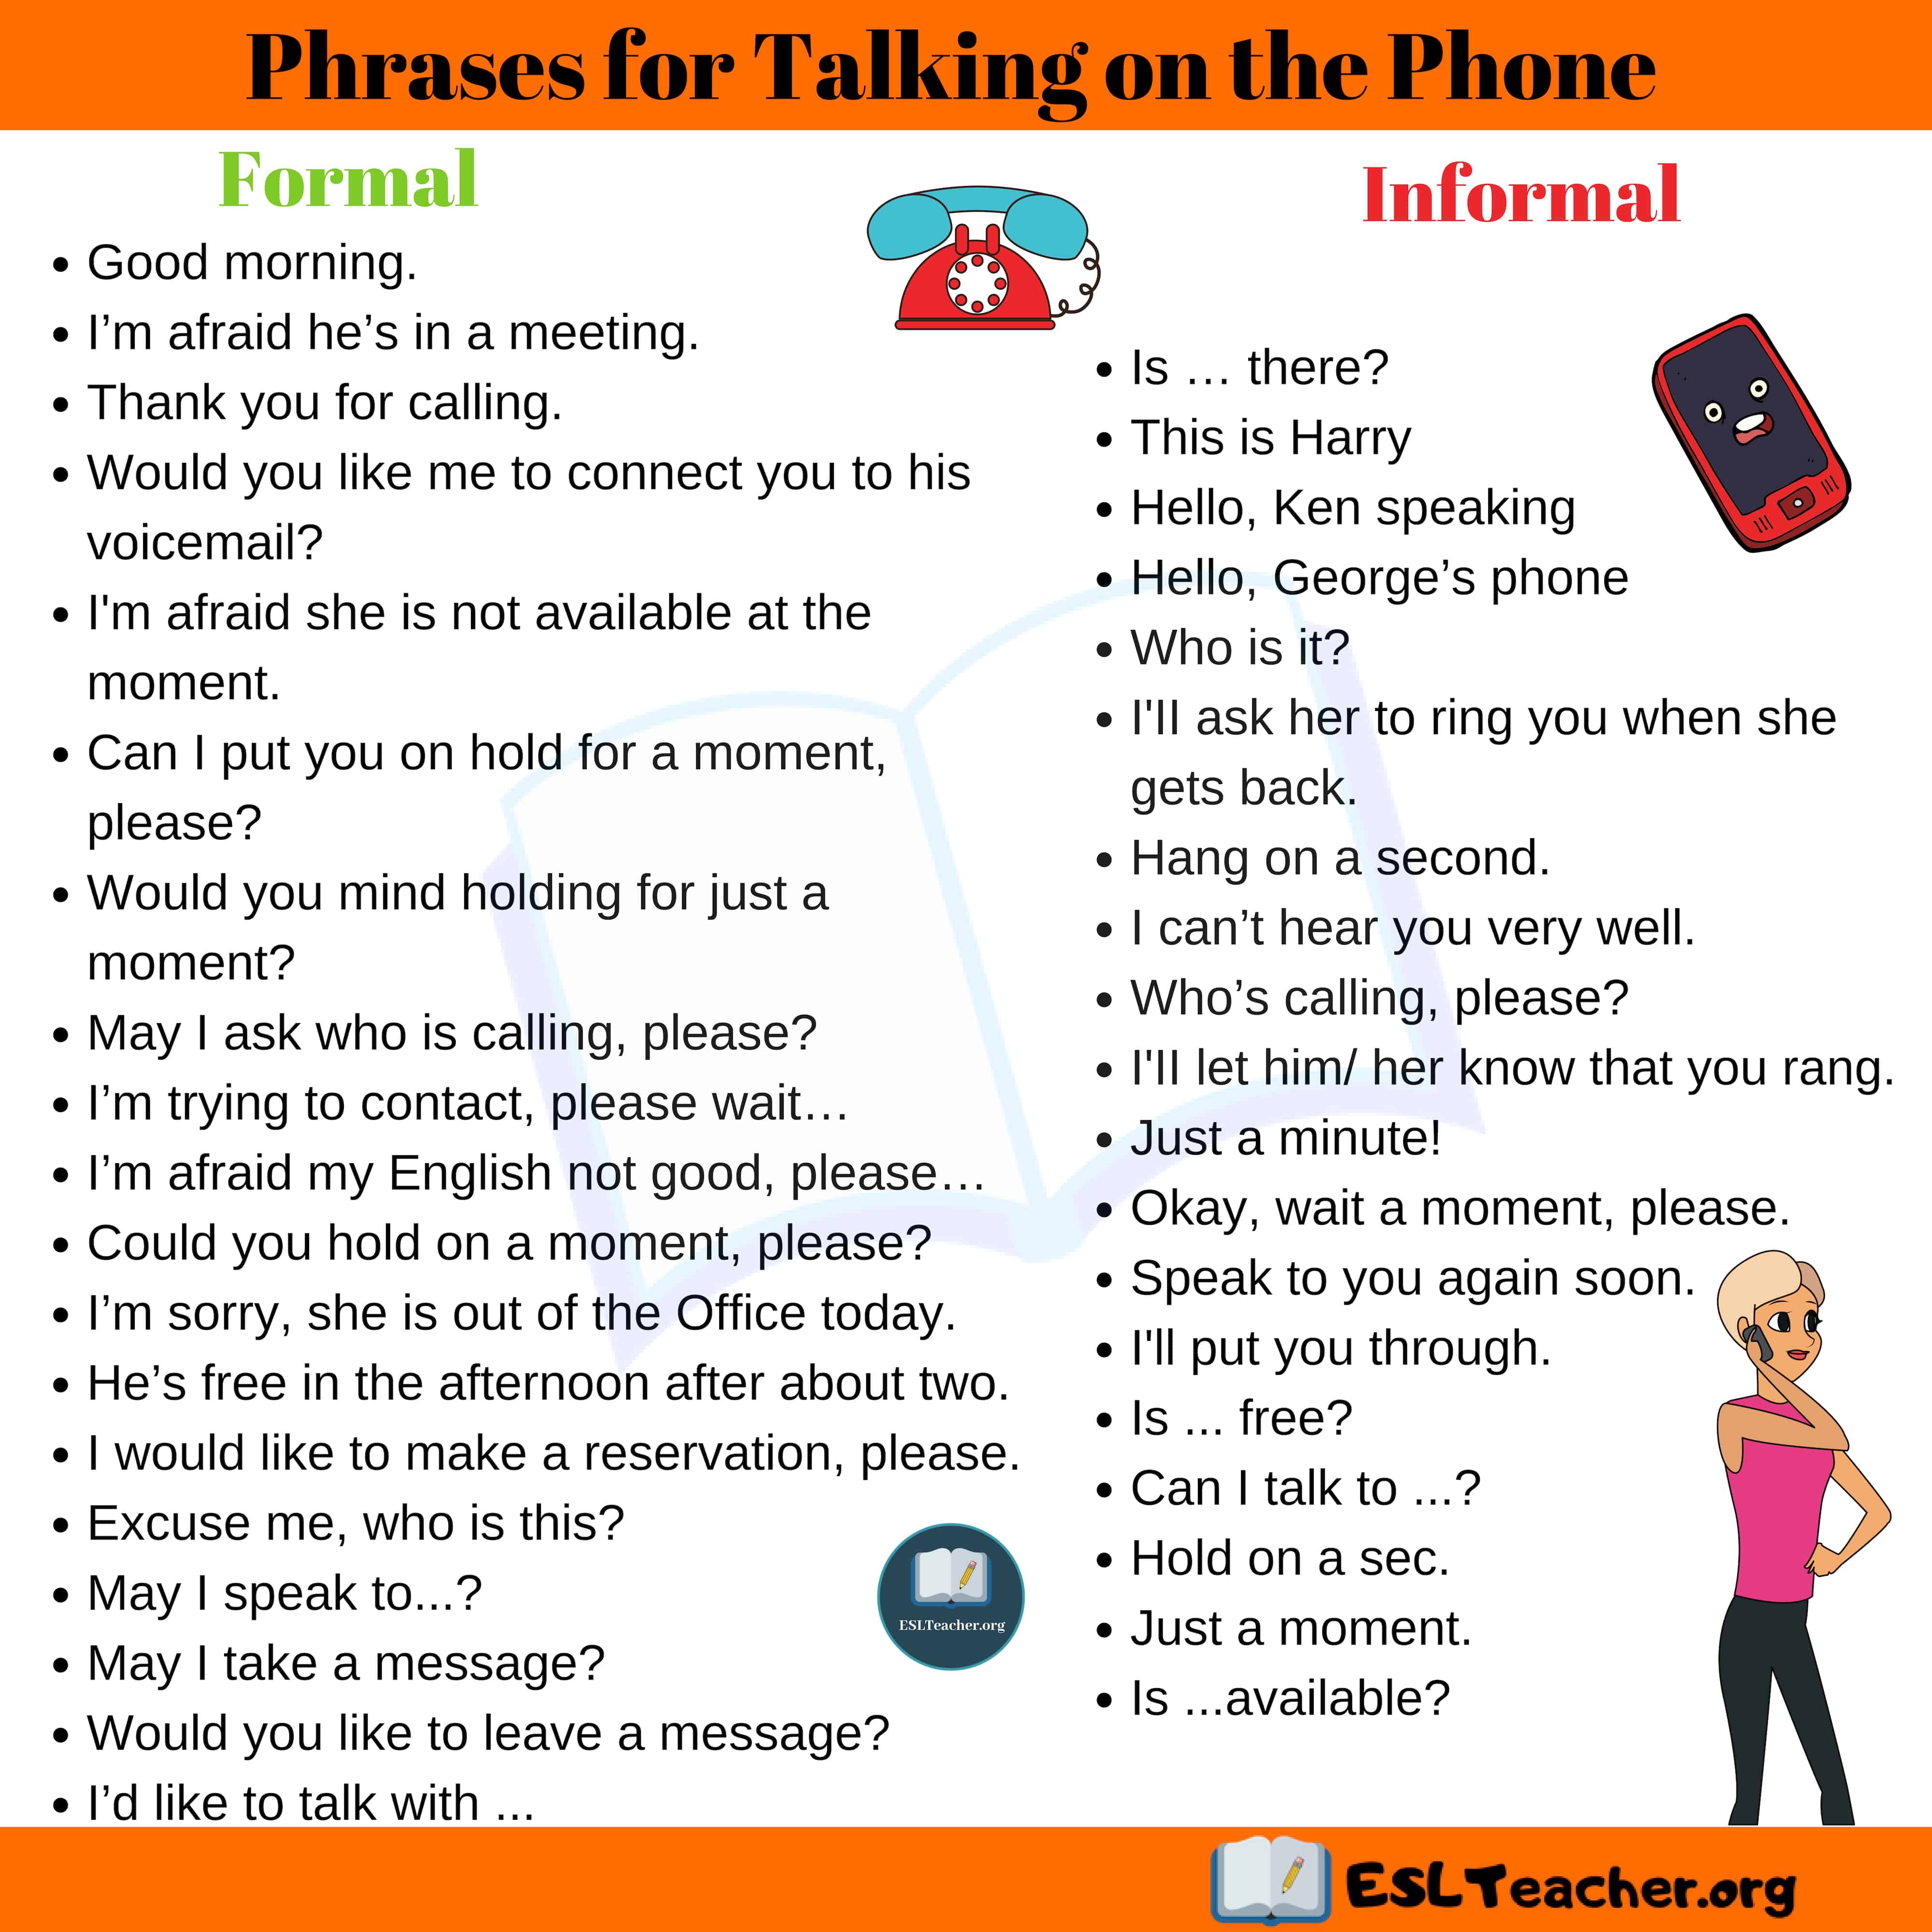 Dialogue calling. Phrases in English. Useful phrases. Phone conversation phrases. Useful phrases in English.